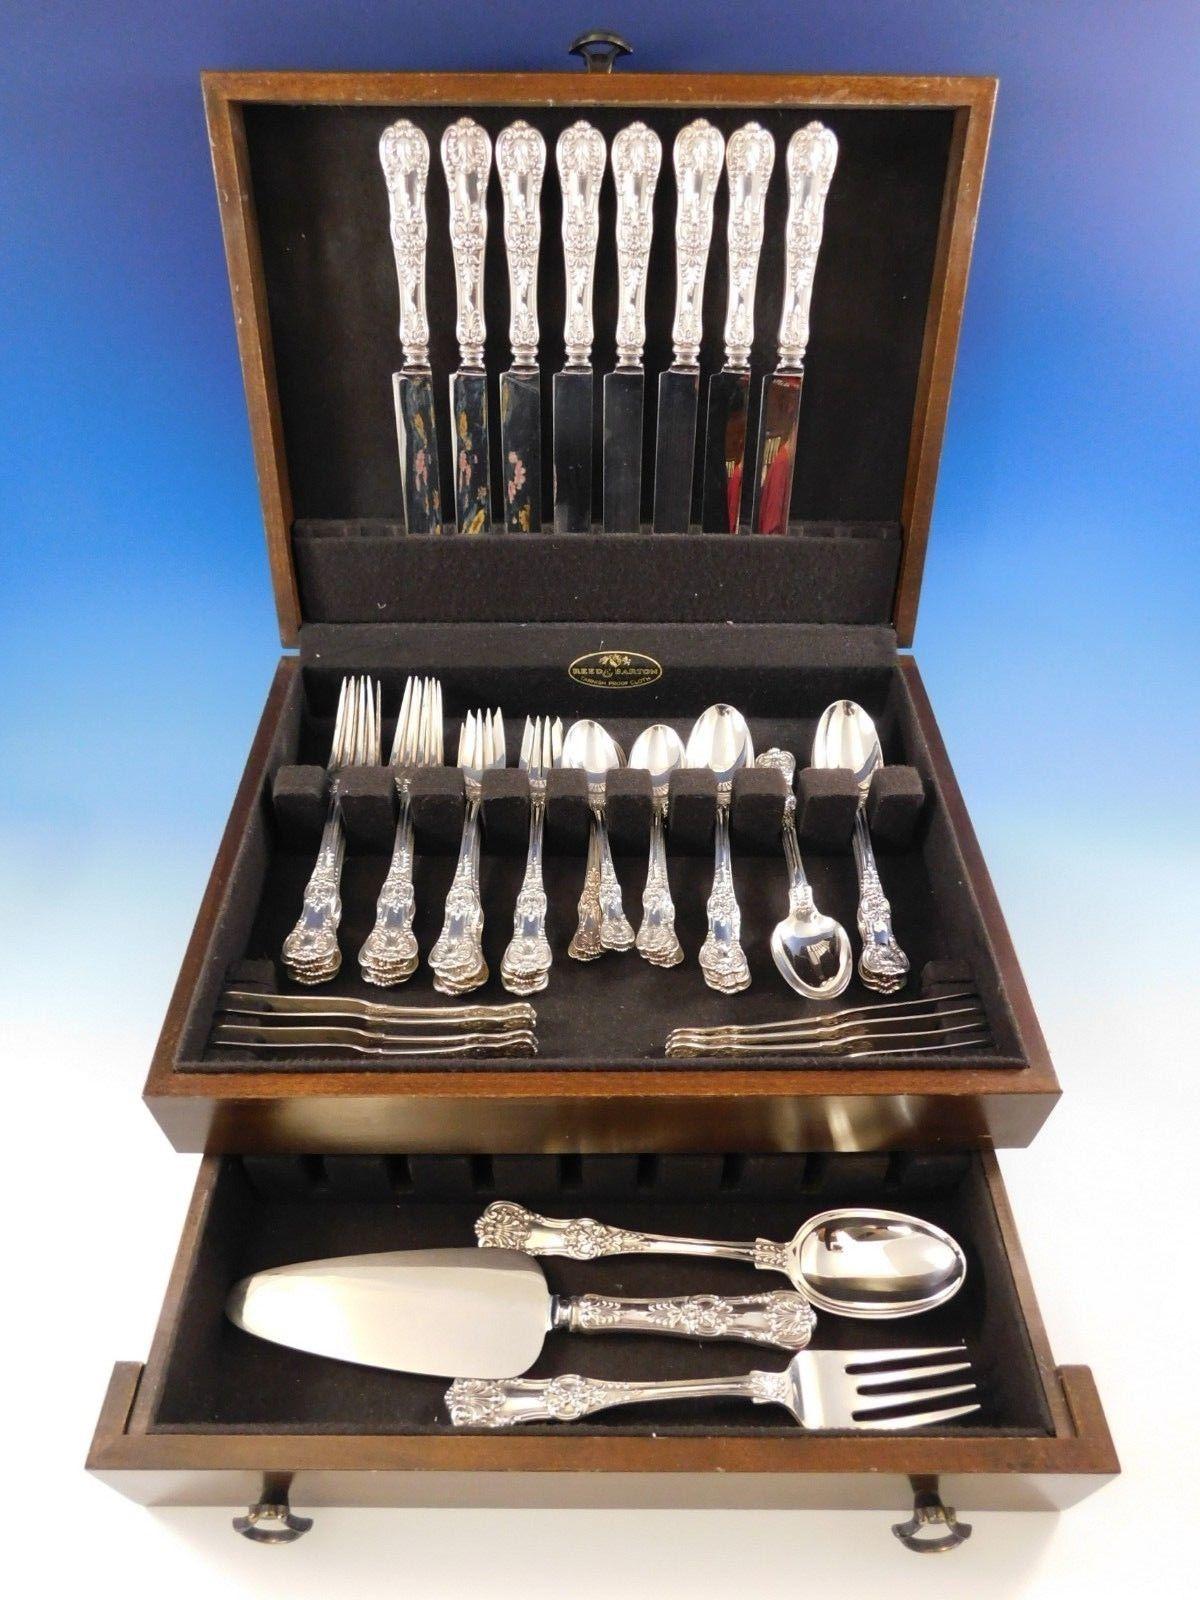 Superb sinner size English King by Tiffany and Co. sterling silver flatware set, 52 pieces. This set includes:

8 dinner knives, 10 1/4